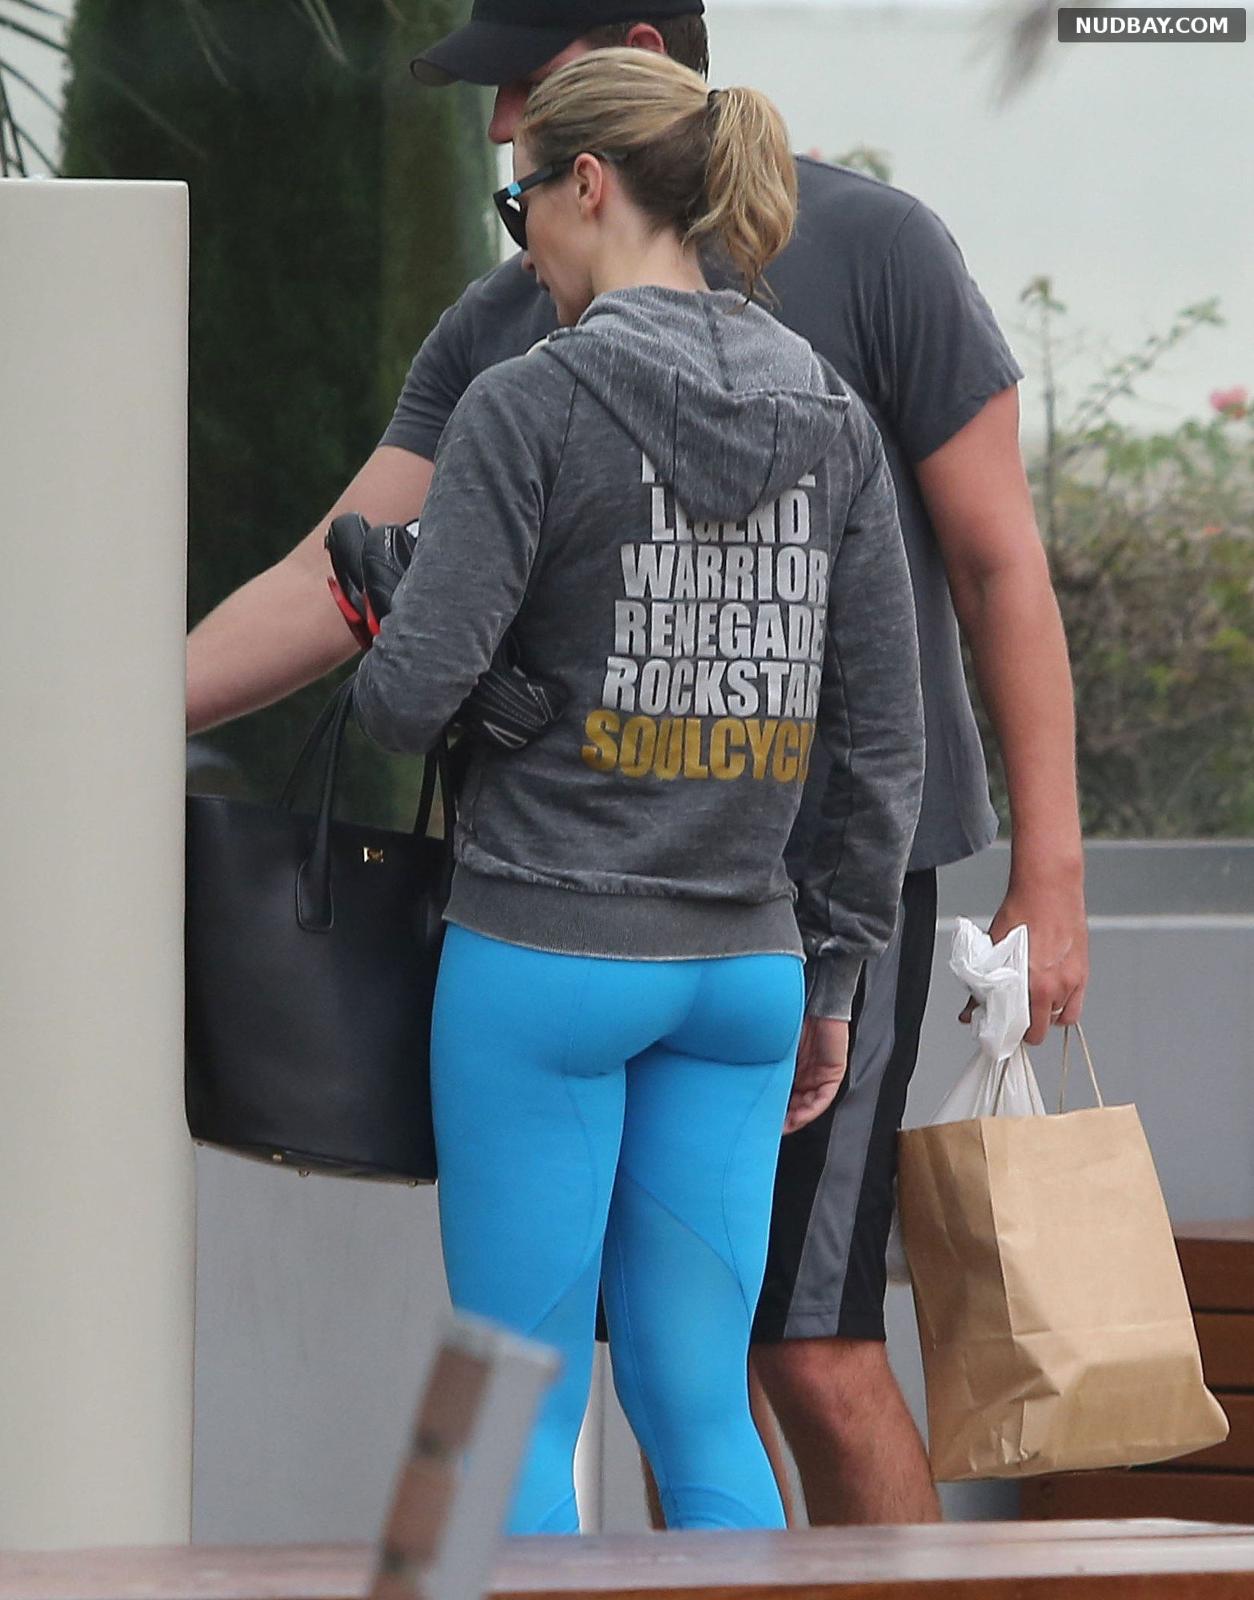 Emily Blunt booty in tights going to a gym in Los Angeles Jun 12 2013